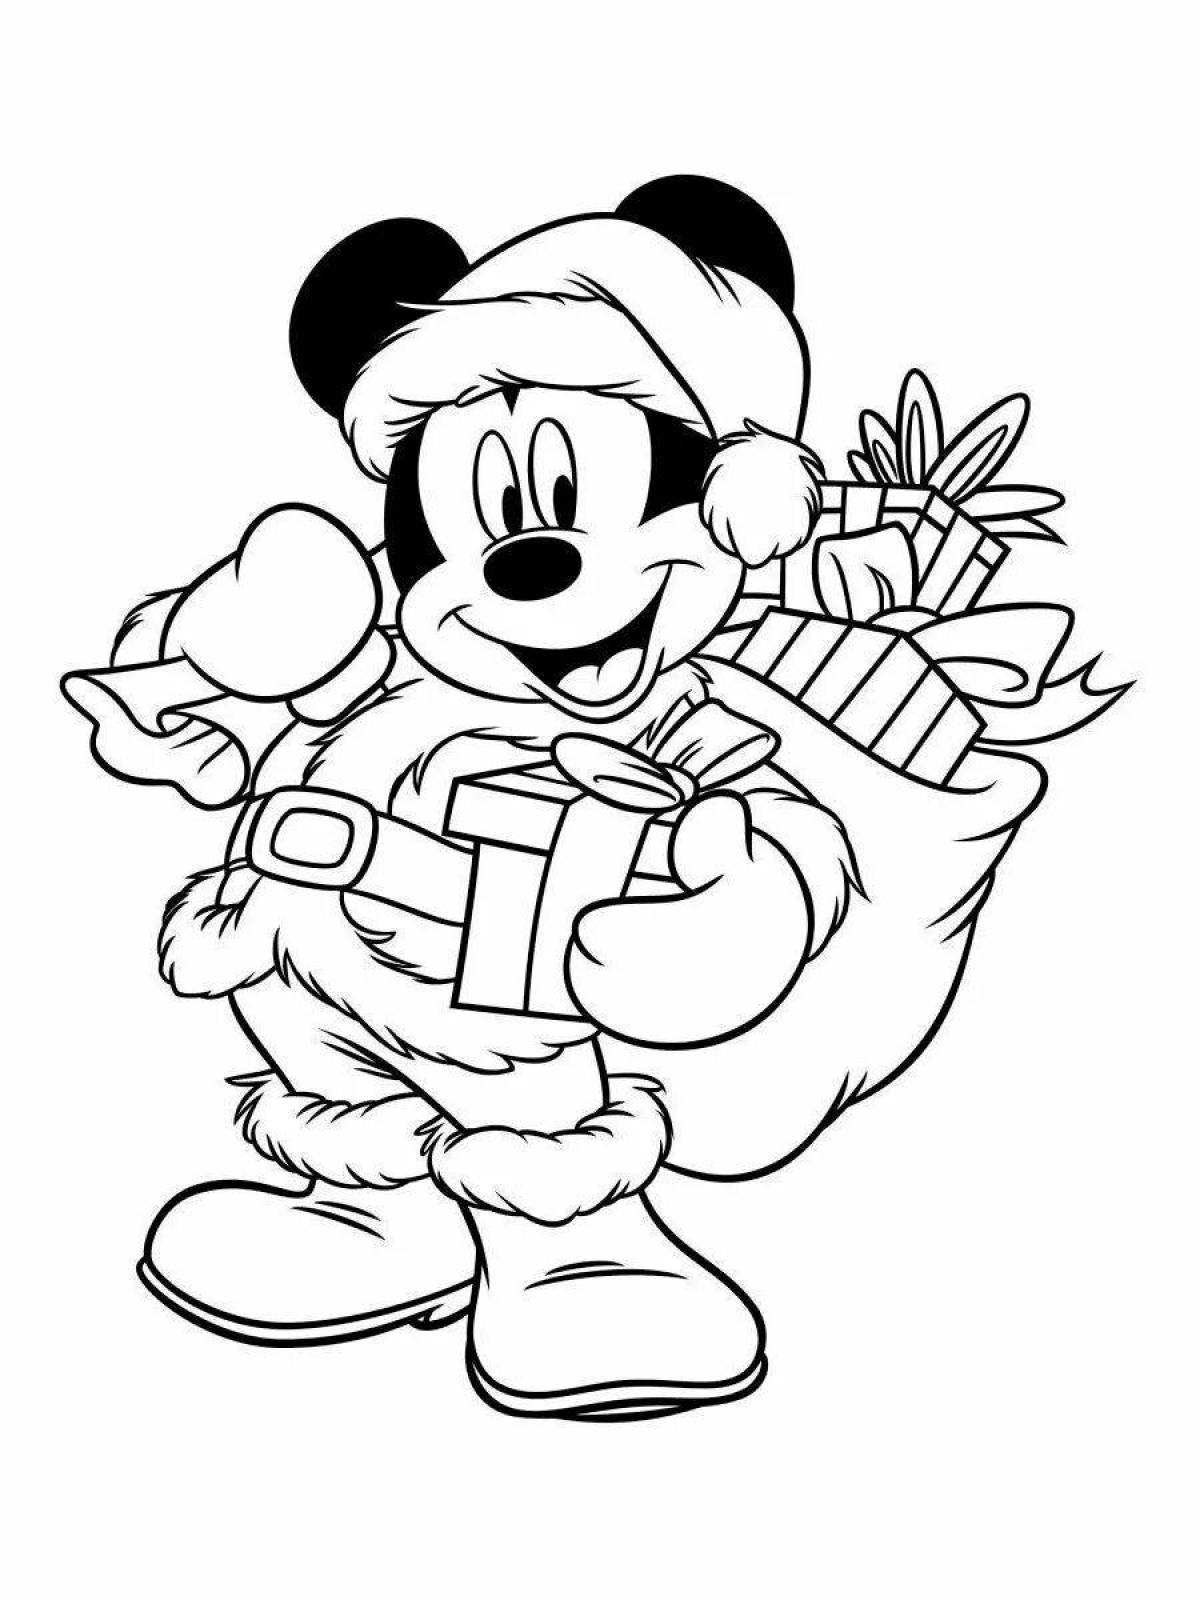 Mickey mouse new year #1